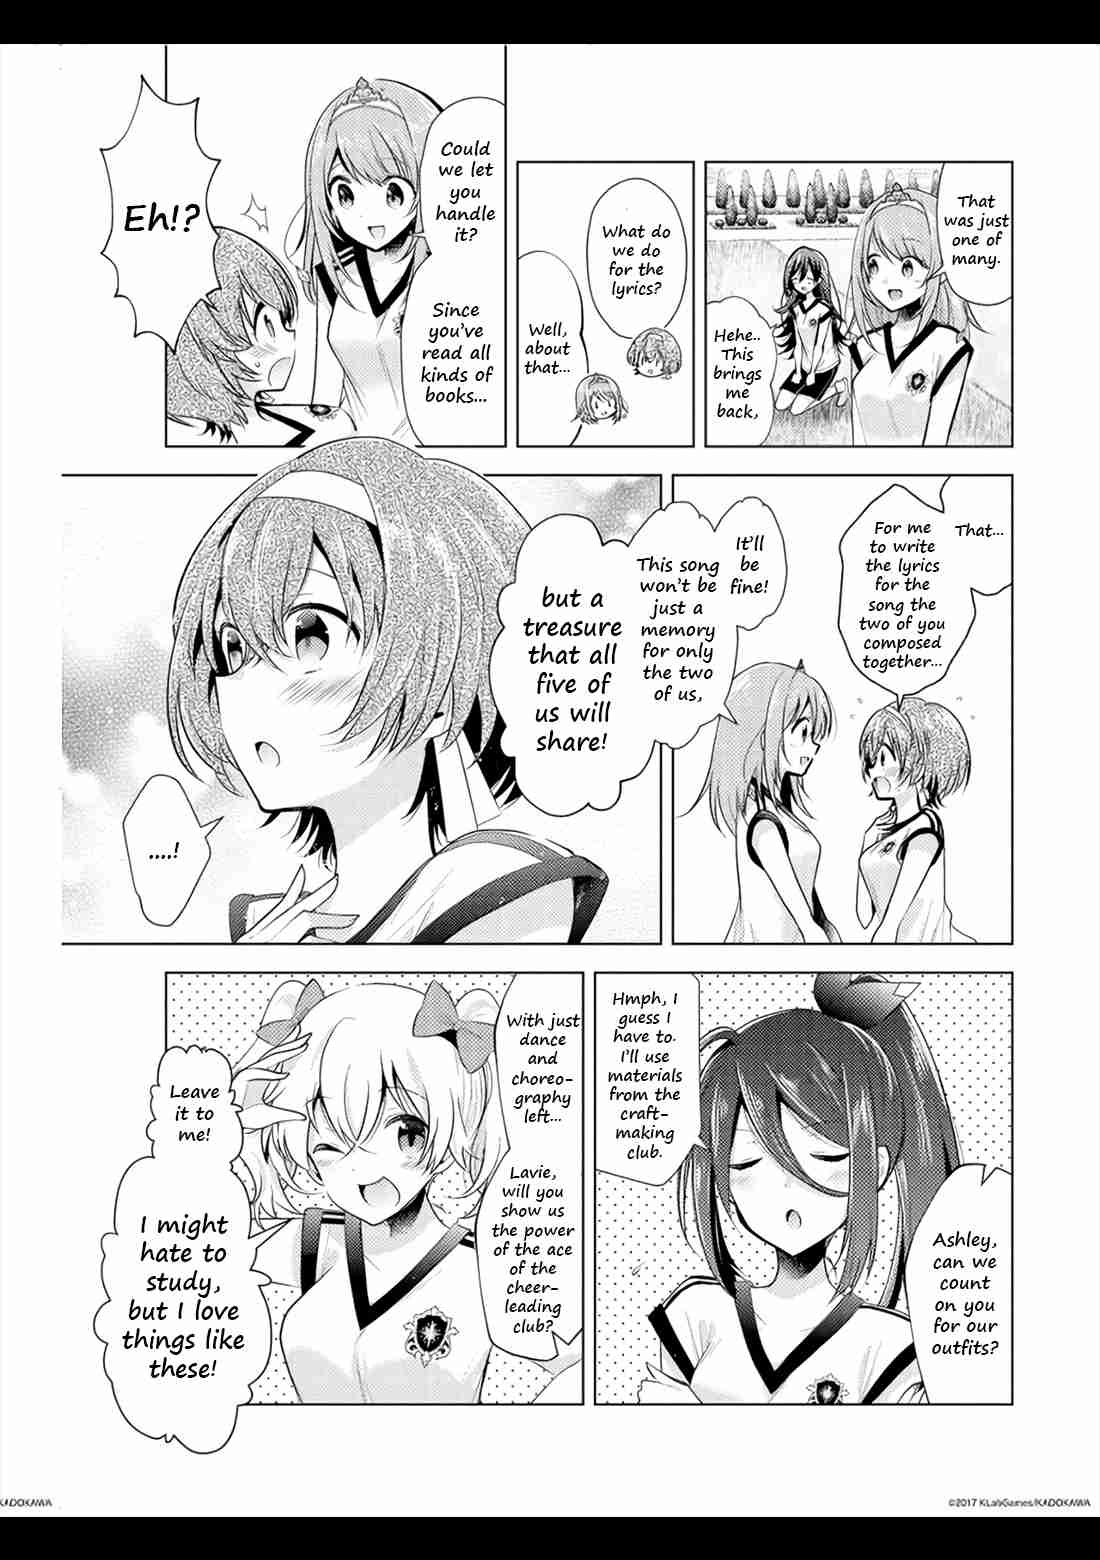 Lapis Re:LiGHTs Web Comic (Our Prelude) Vol. 1 Ch. 3 Our Prelude (LiGHTs)